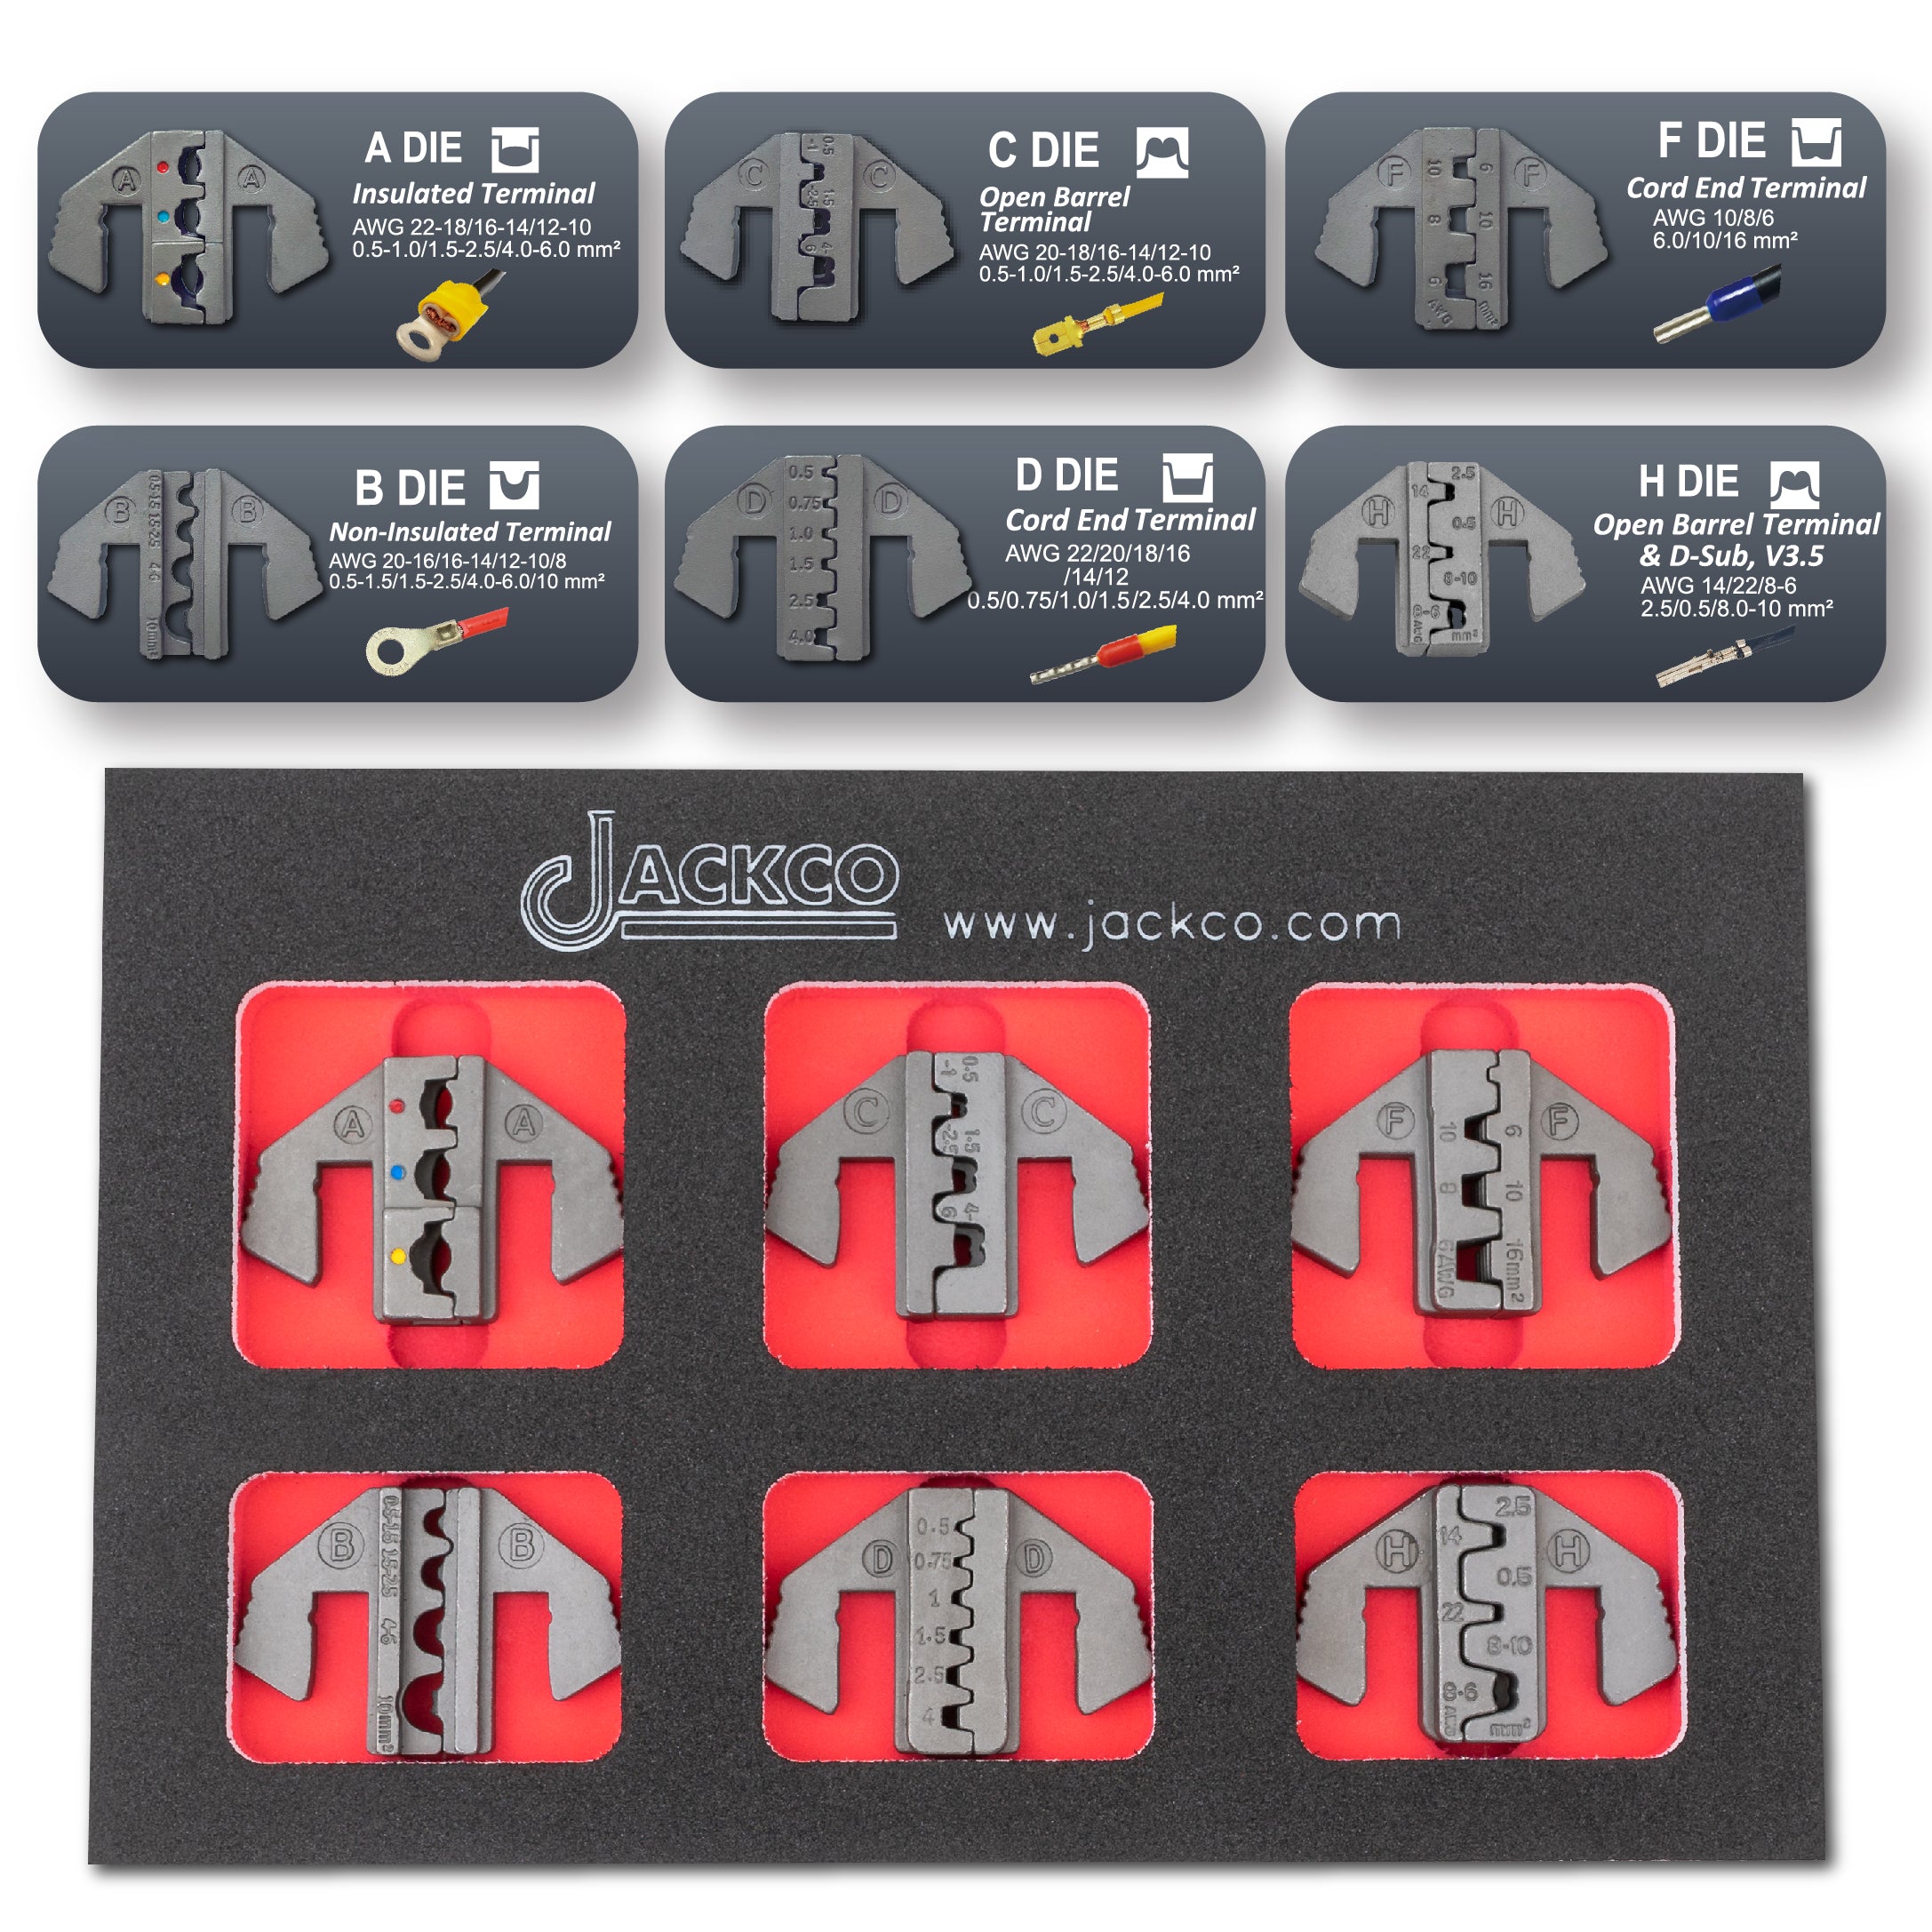 Crimping Tool Die Set - A, B, C, D, F, H Dies for Insulated, Non Insulated, Open Barrel & Cord End Terminals